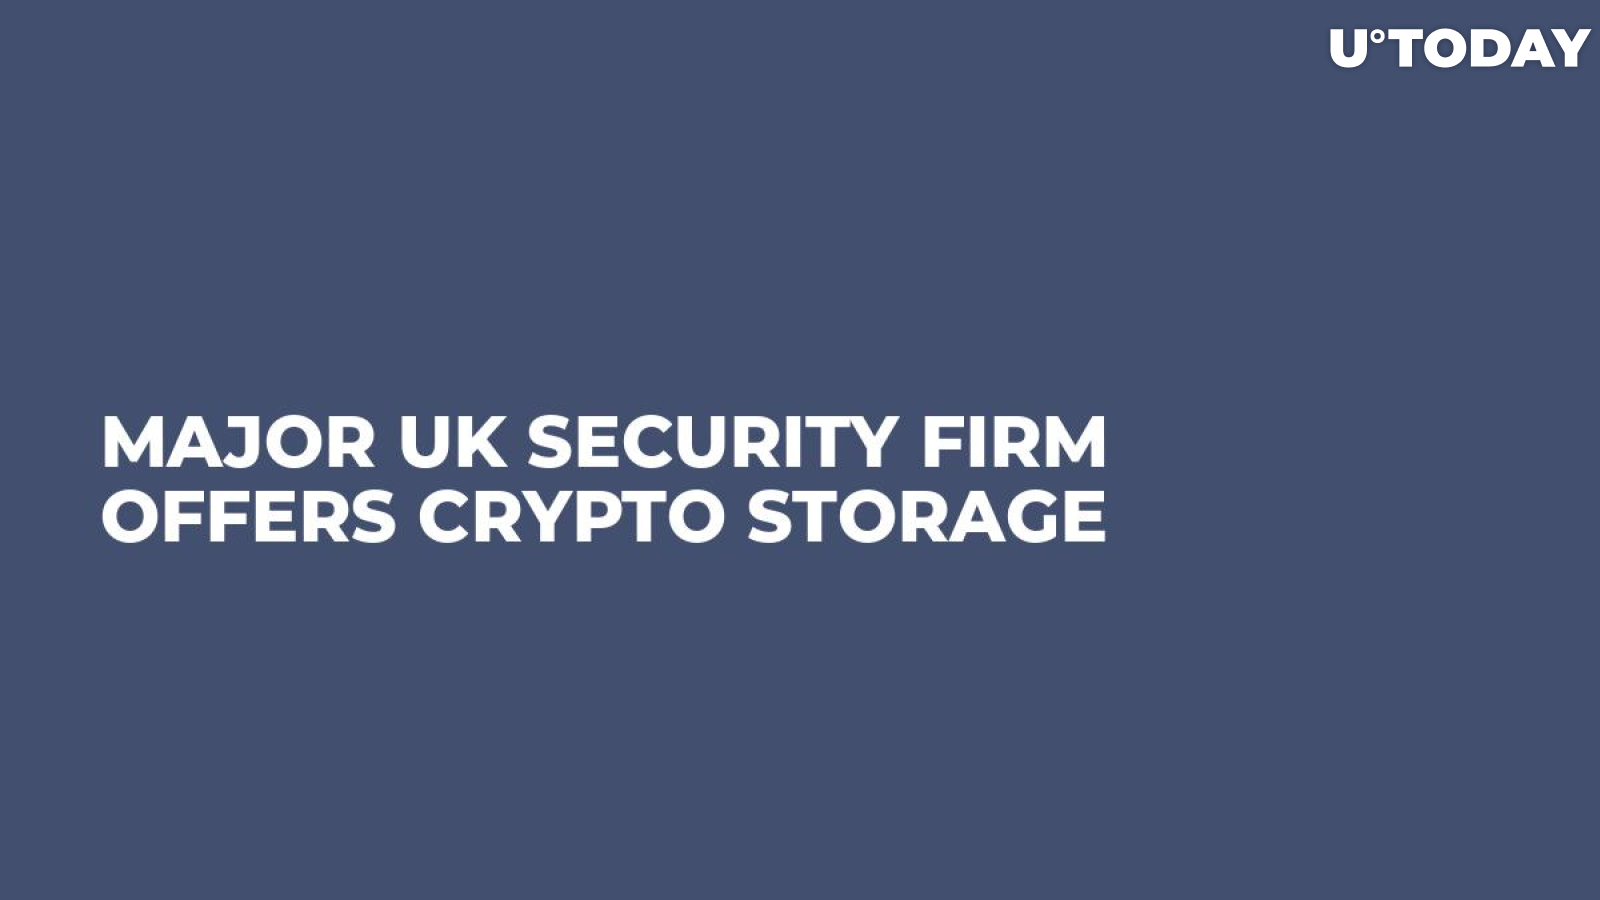 Major UK Security Firm Offers Crypto Storage  